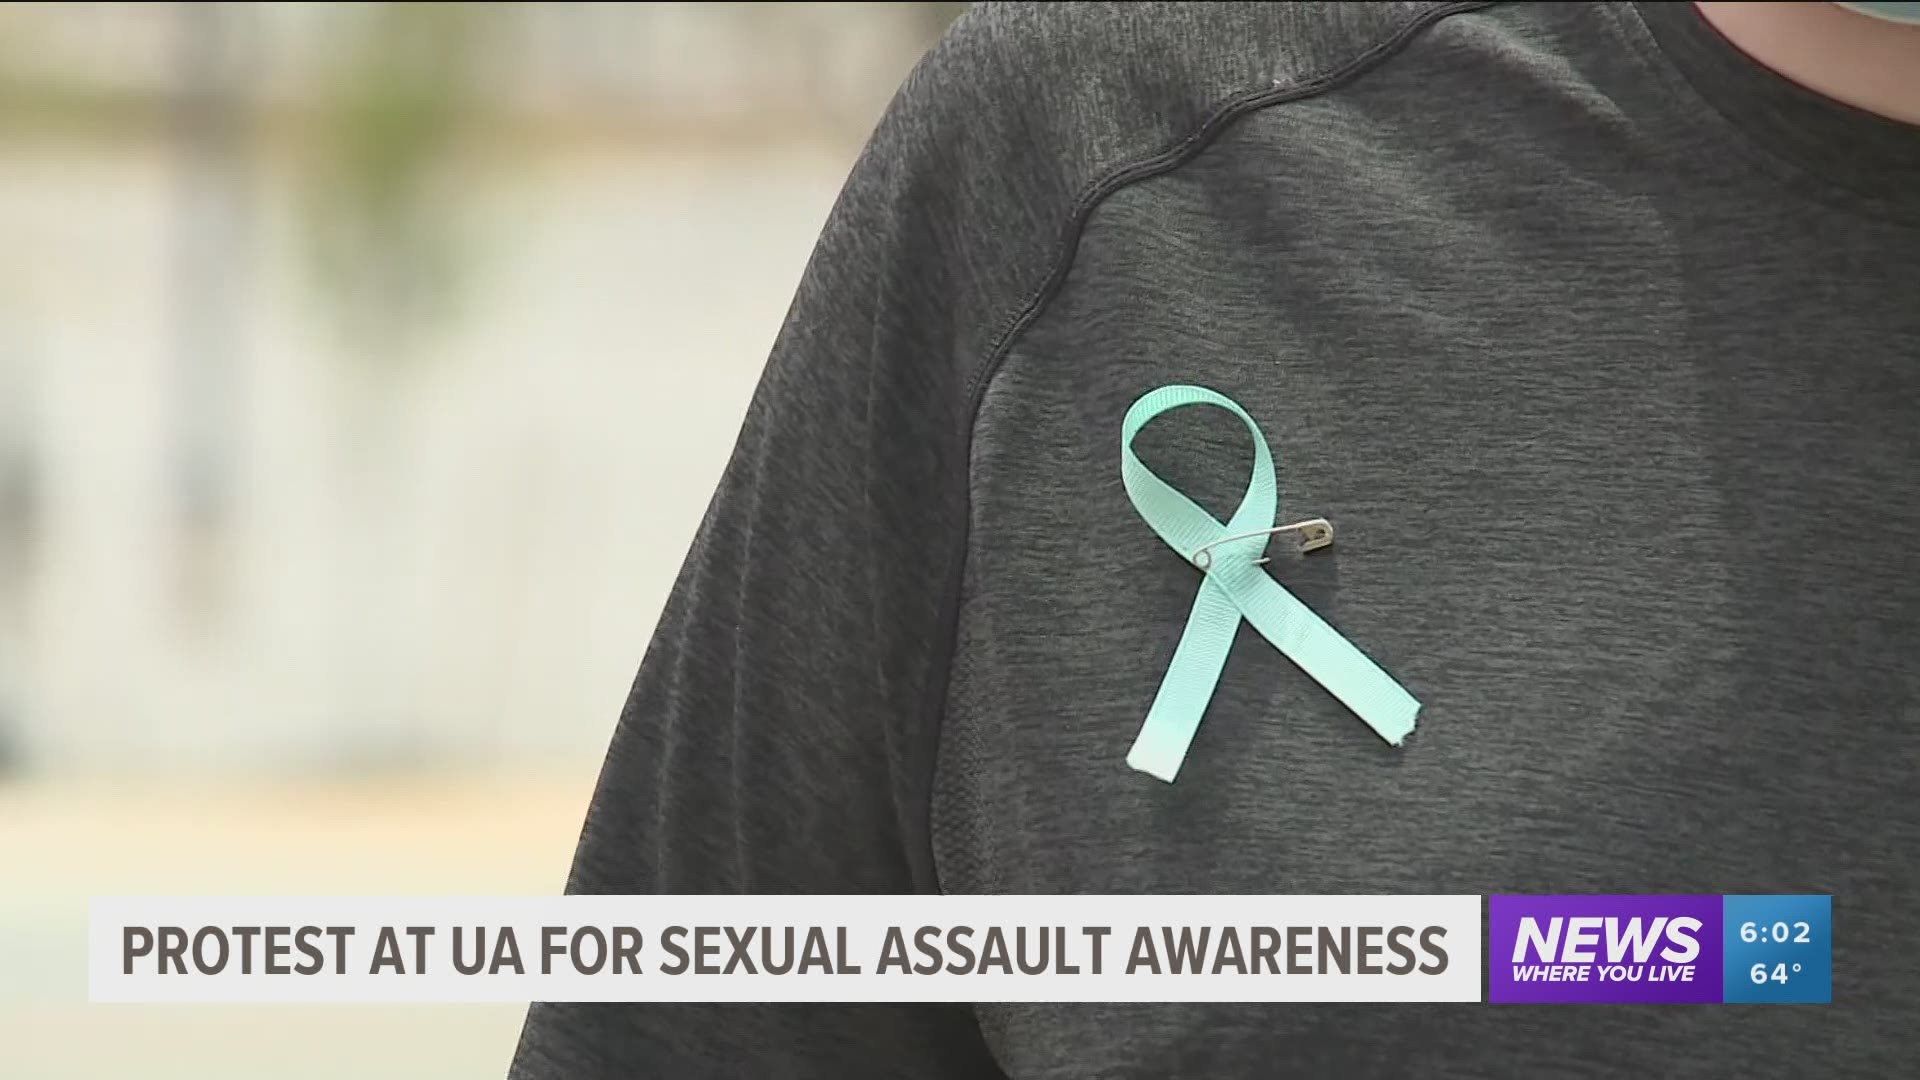 Students at the UA say they are standing up for victims and letting campus administrators know more needs to be done to protect students on campus.